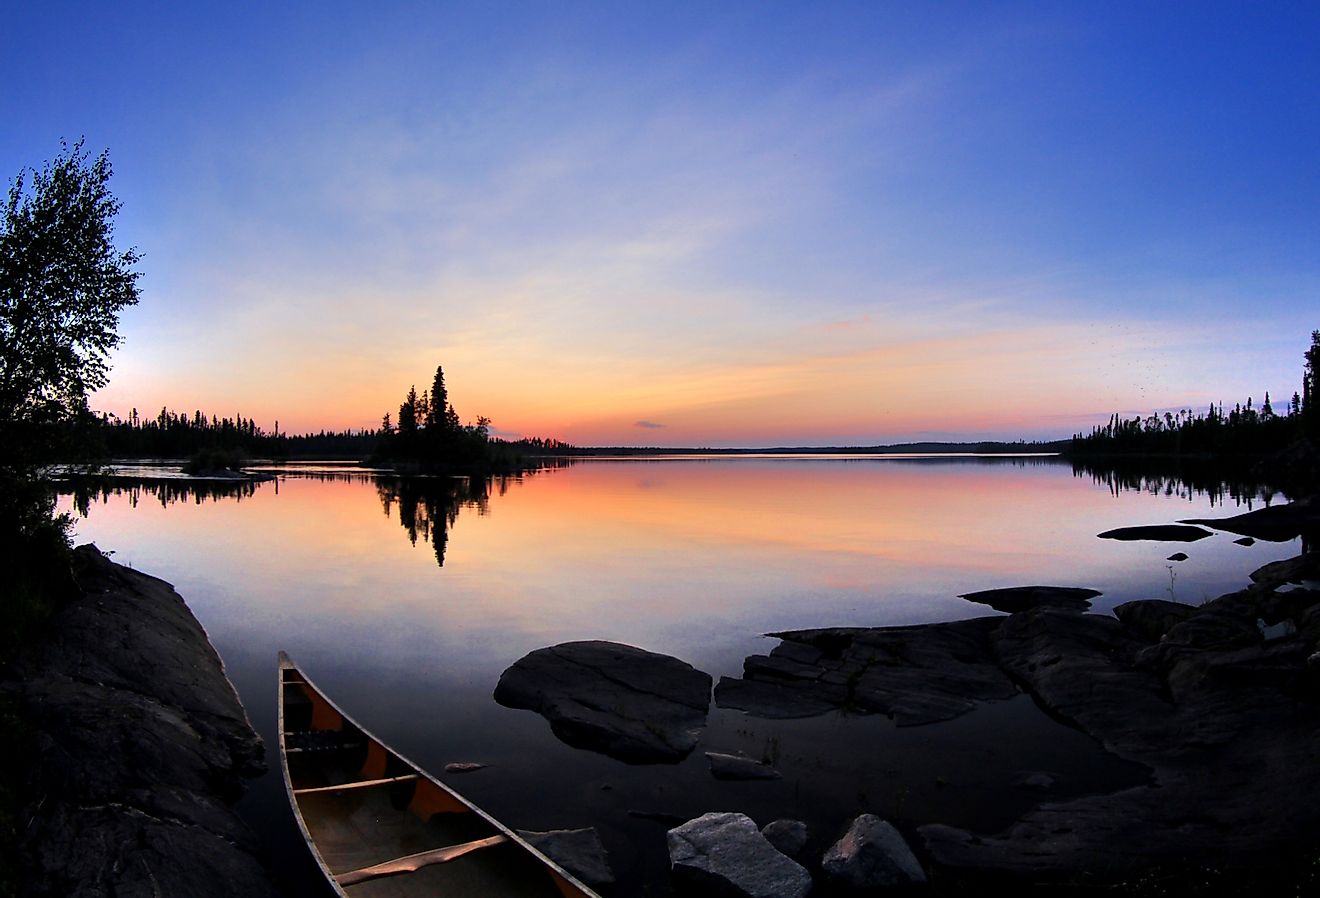 Calm summer day in northern Saskatchewan. In the Churchill River system. Image credit Curtis N. via Shutterstock. 